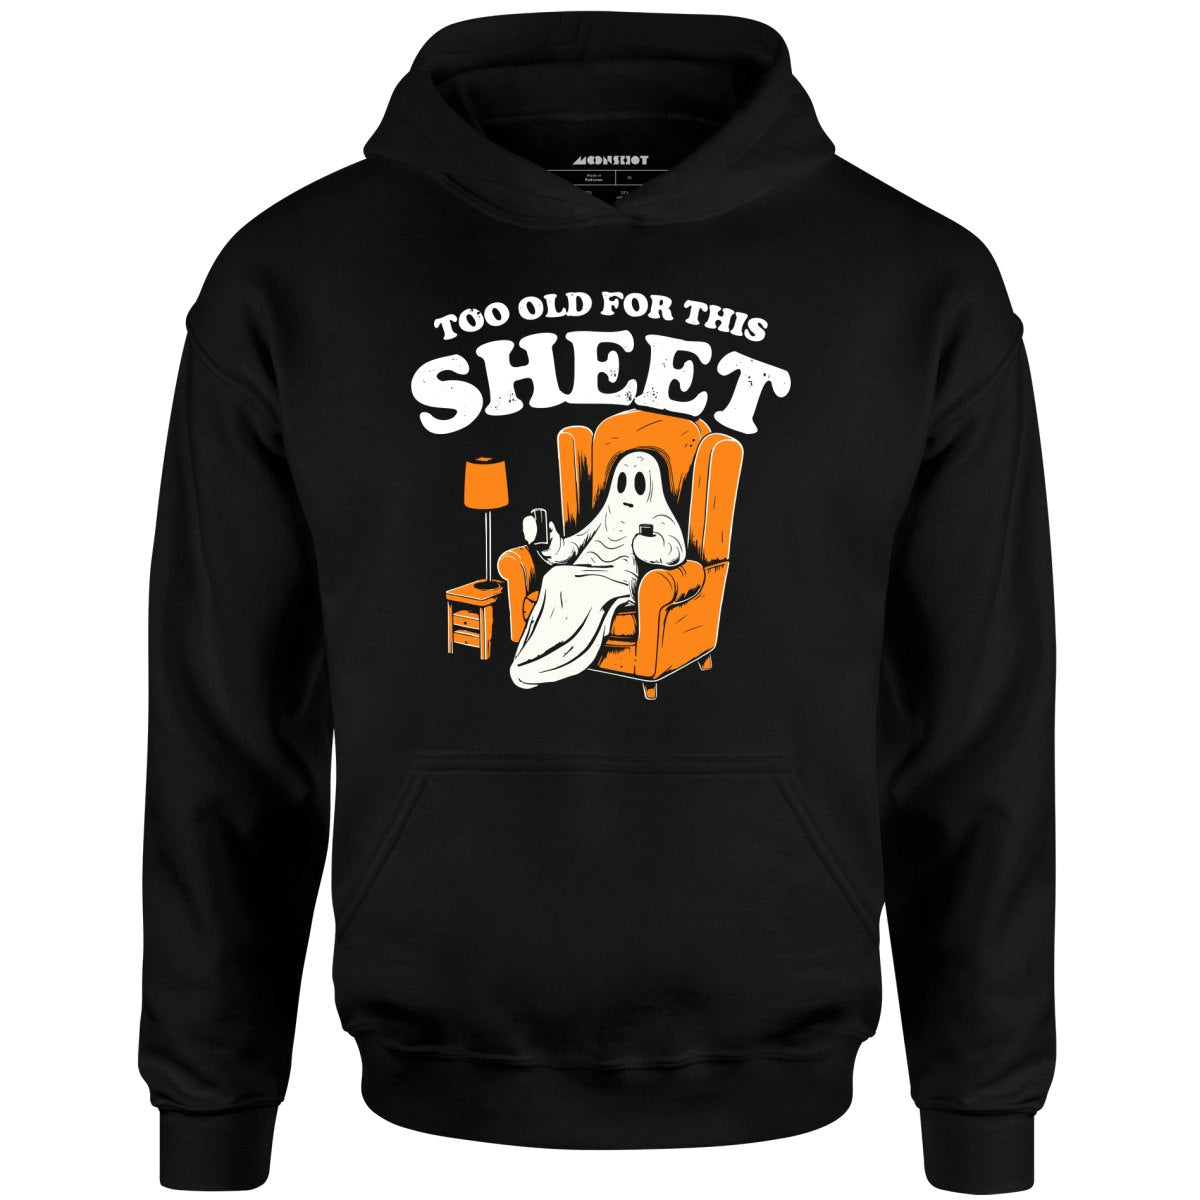 Too Old For This Sheet - Unisex Hoodie